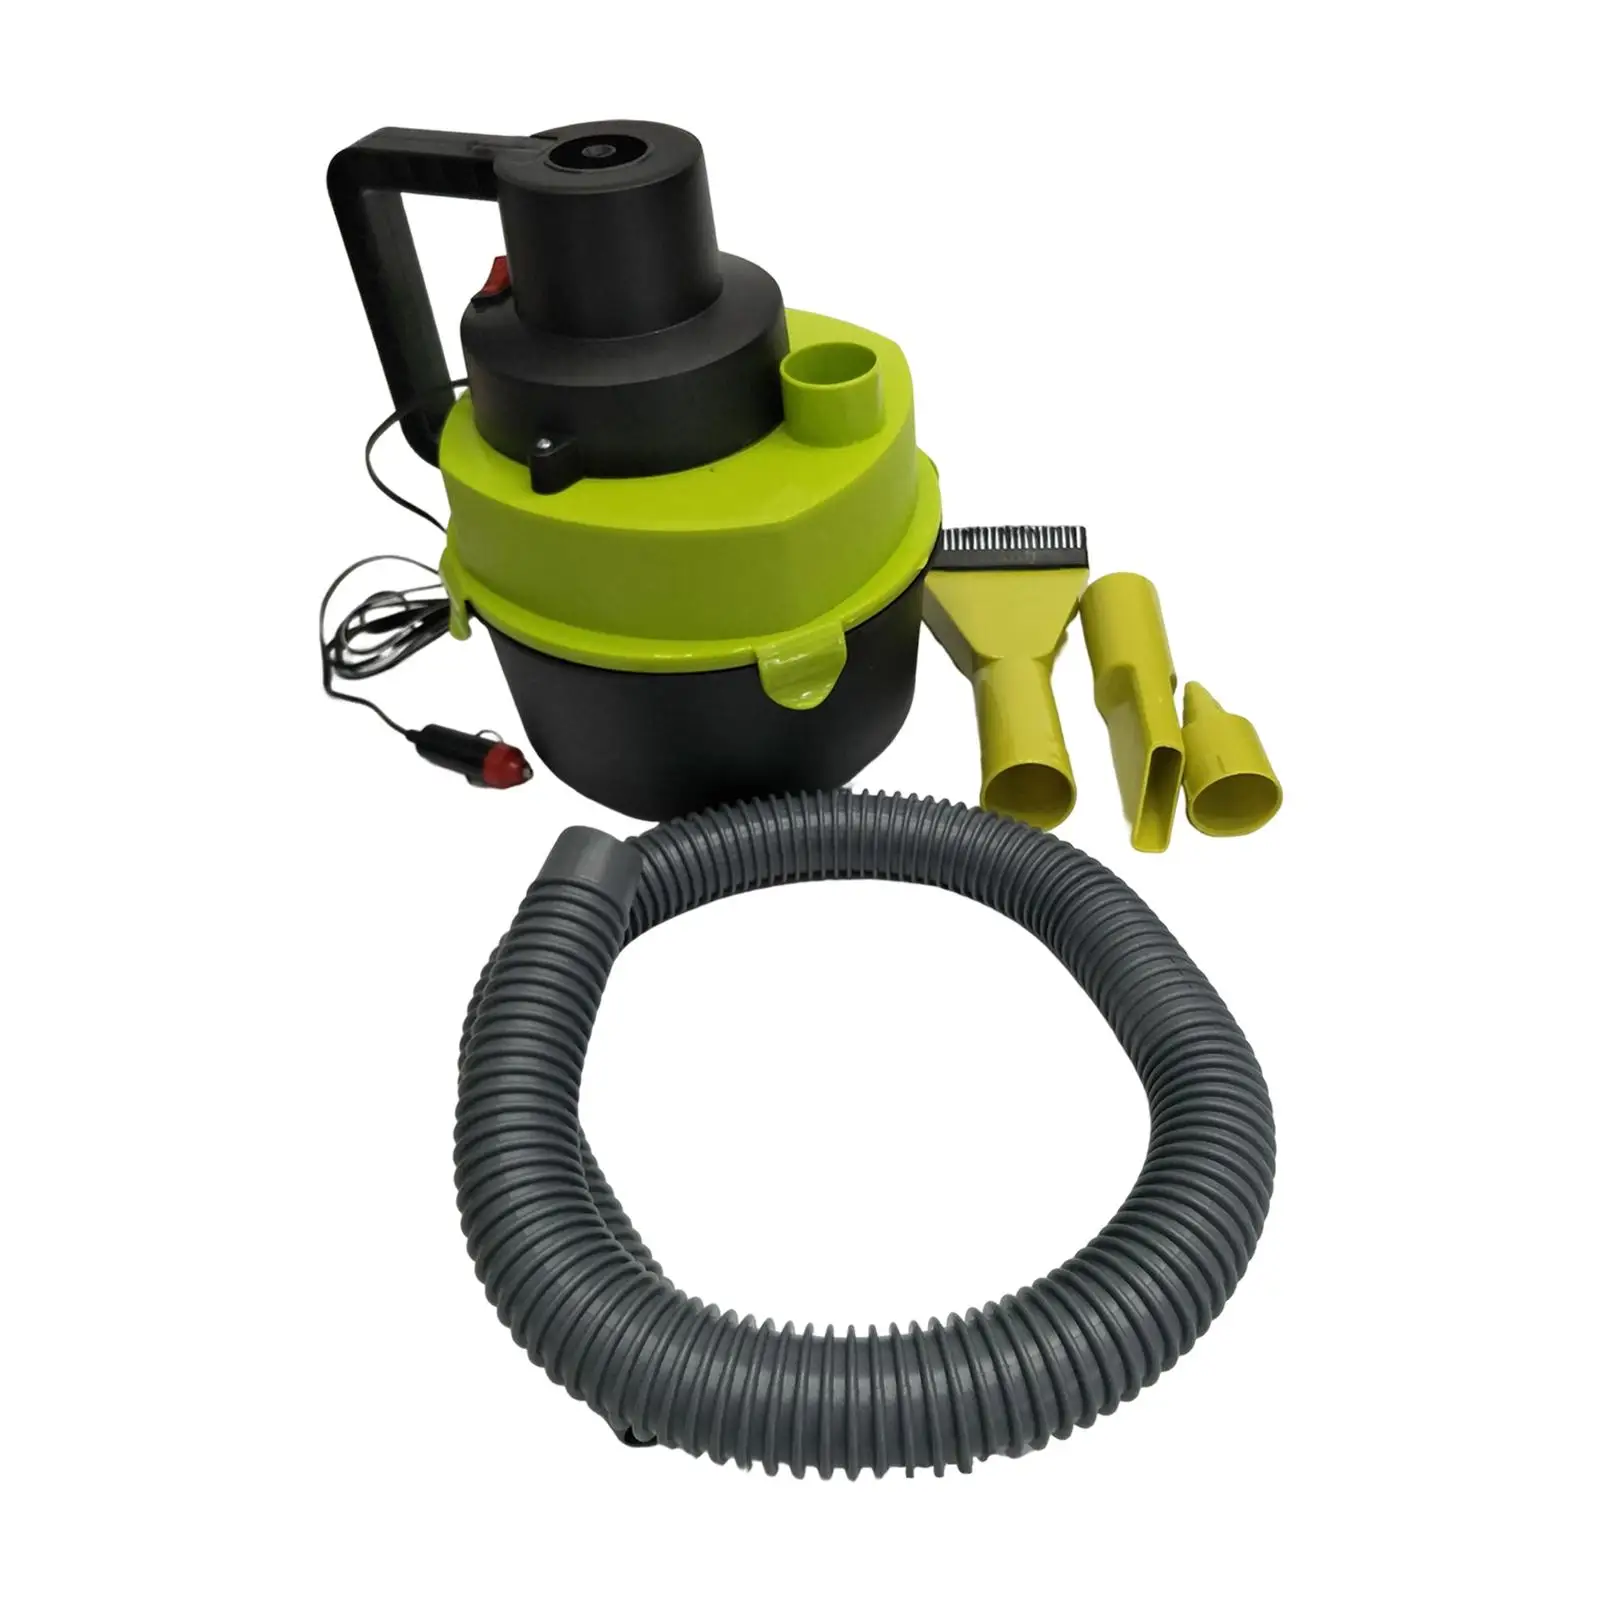 dry wet Vacuum Portable Shop Vacuum with Attachments for home Basement